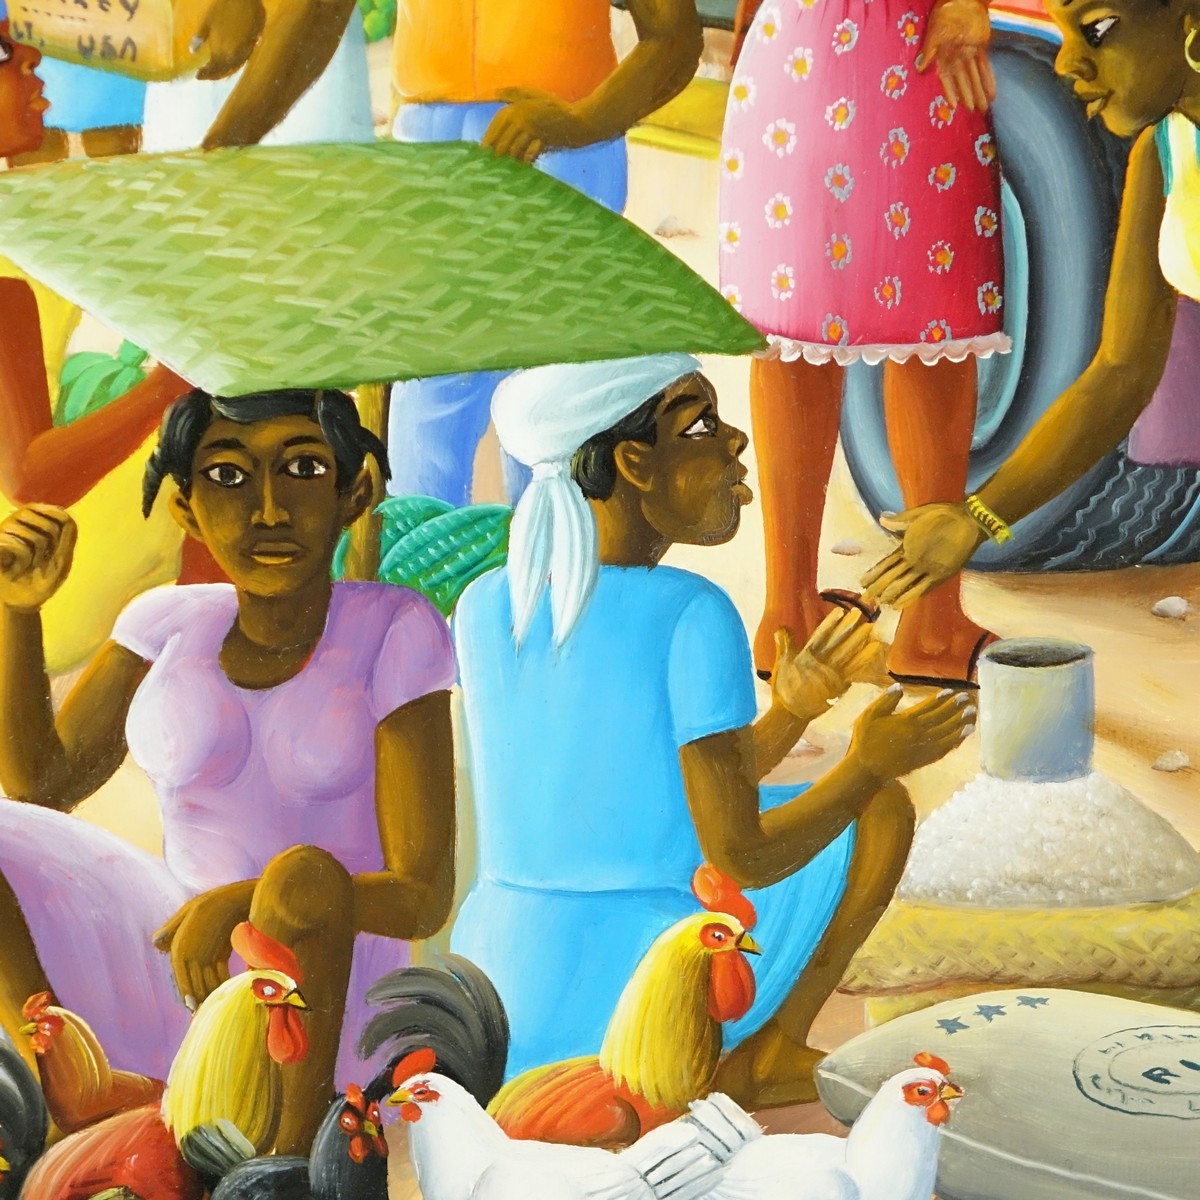 Andre Normil, Haitian (born 1934) Oil on Canvas, Busy Street Scene, Signed Lower Right. Artist information attached en verso.